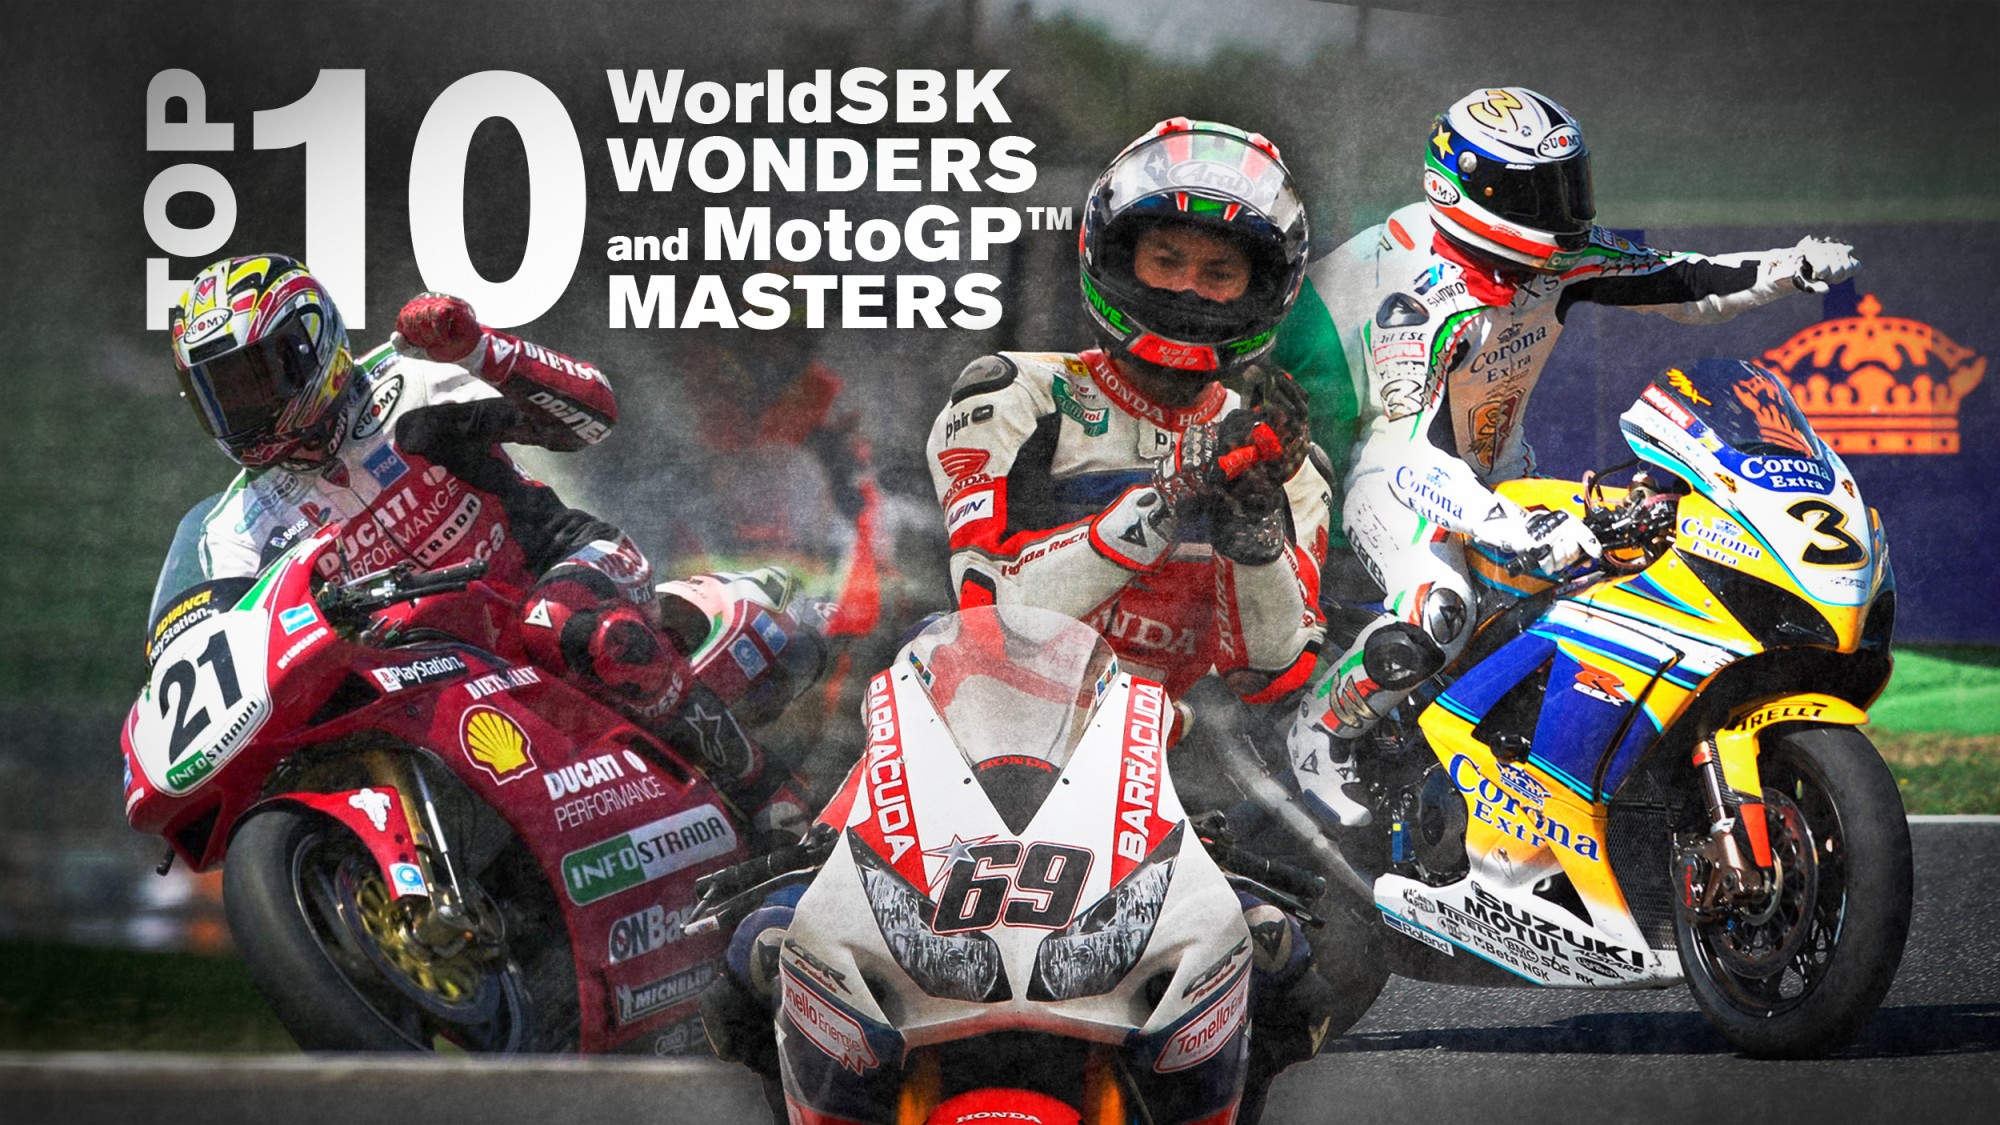 THE COUNTRIES THAT HAVE WON THE MOST MOTOGP/500 WORLD TITLES